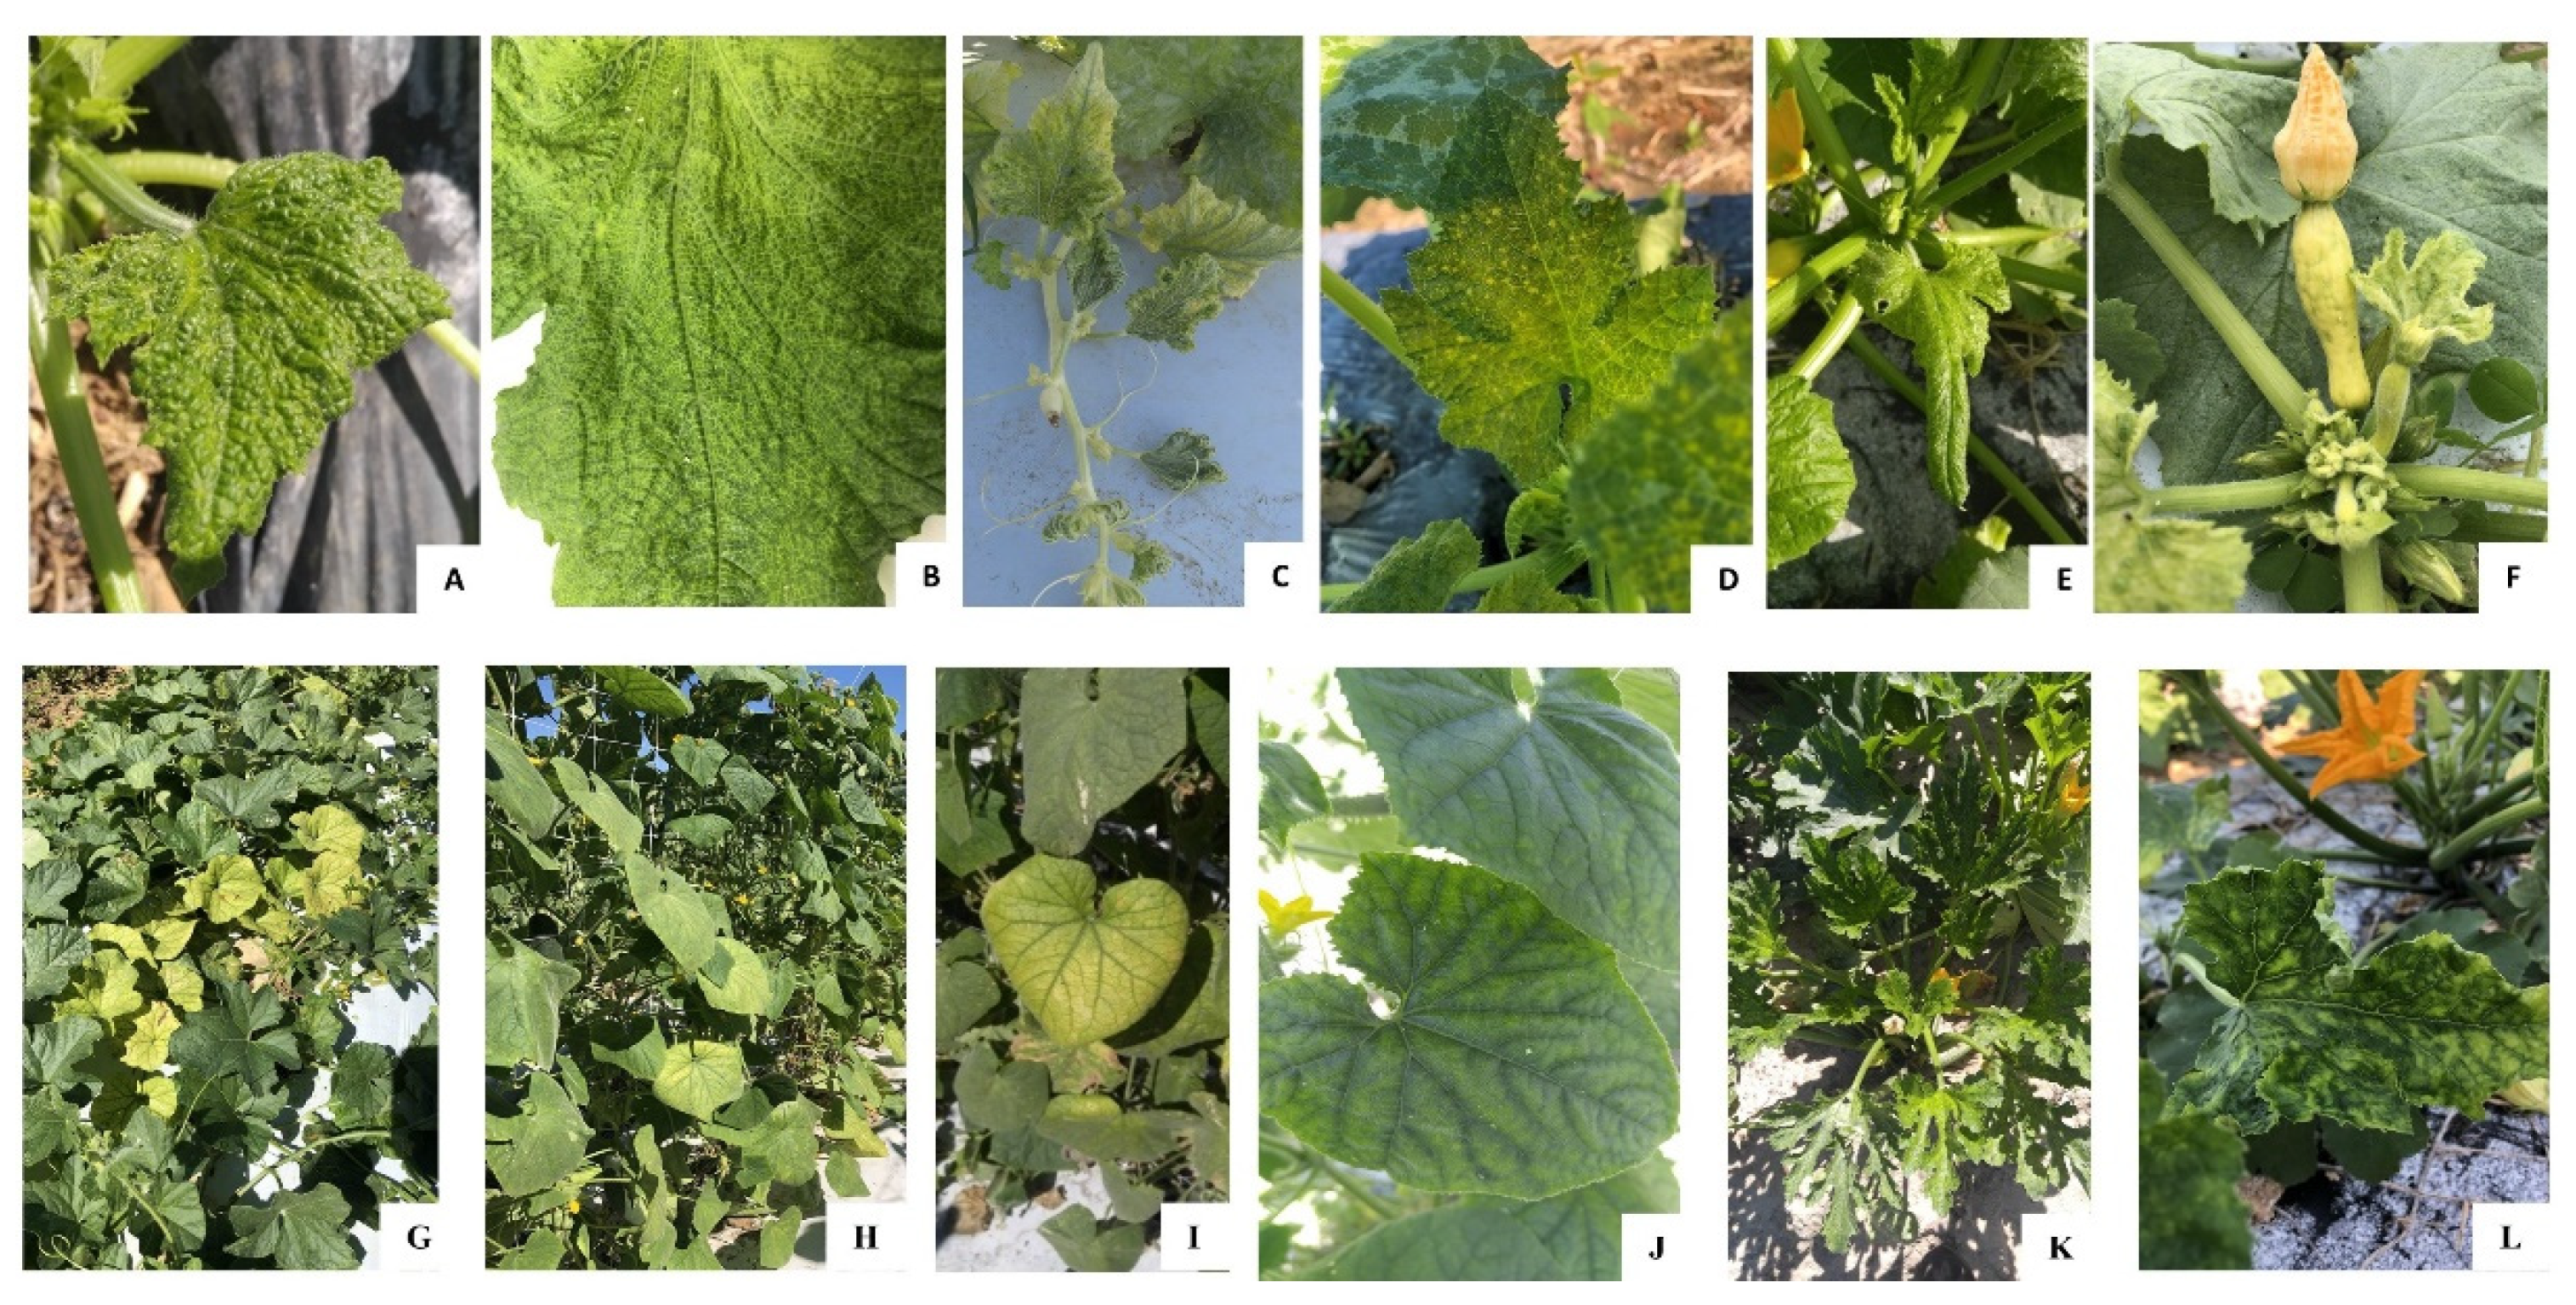 Viruses | Free Full-Text | High Throughput Sequencing-Aided Survey Reveals  Widespread Mixed Infections of Whitefly-Transmitted Viruses in Cucurbits in  Georgia, USA